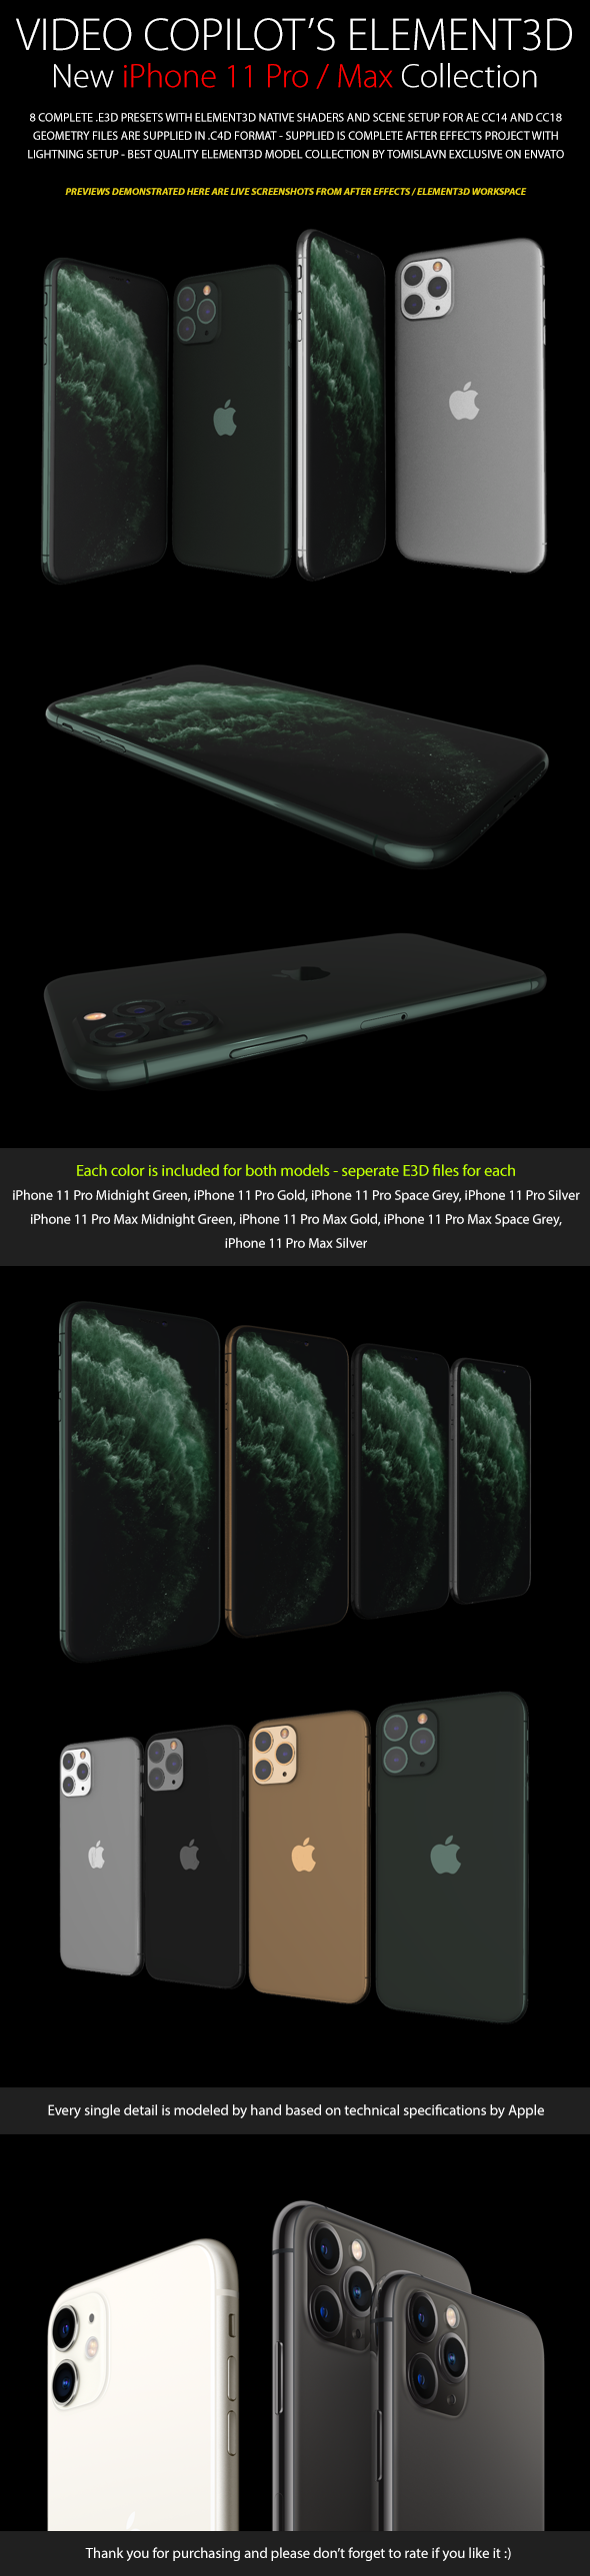 Element3D - iPhone 11 Pro / Max Collection